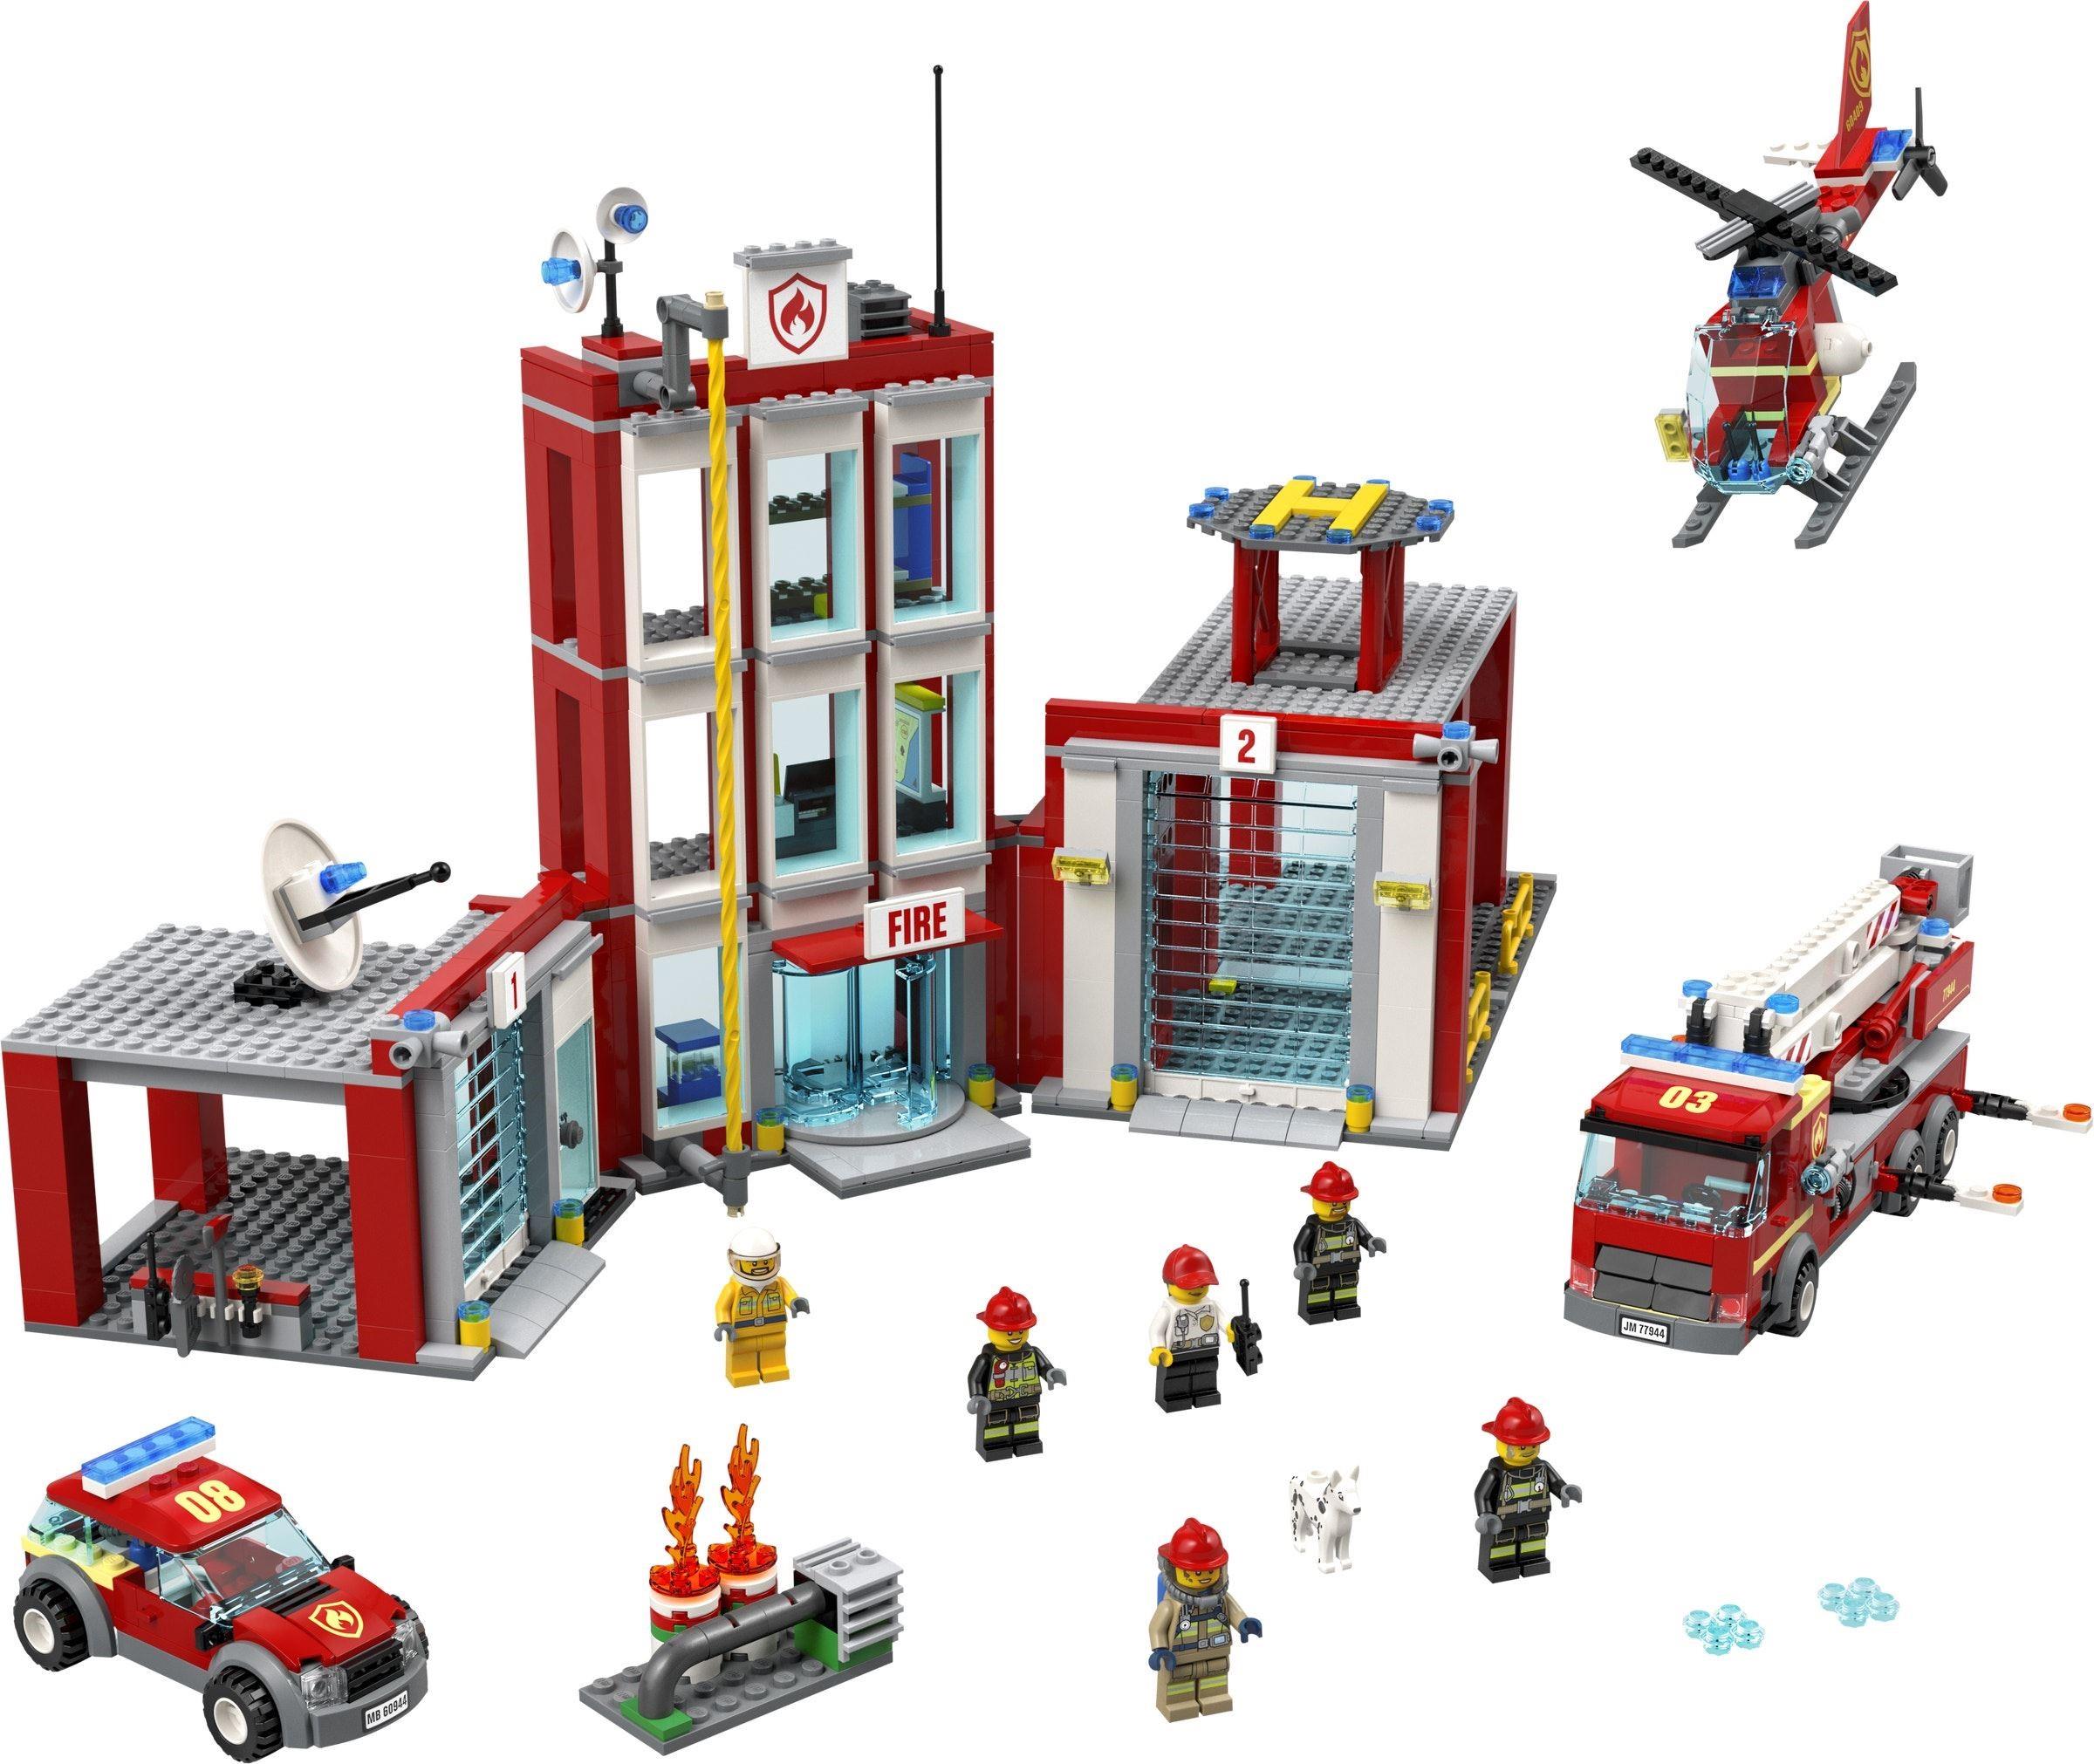 omhyggeligt Glamour kampagne LEGO 77944 City Fire Station Headquarters | BrickEconomy